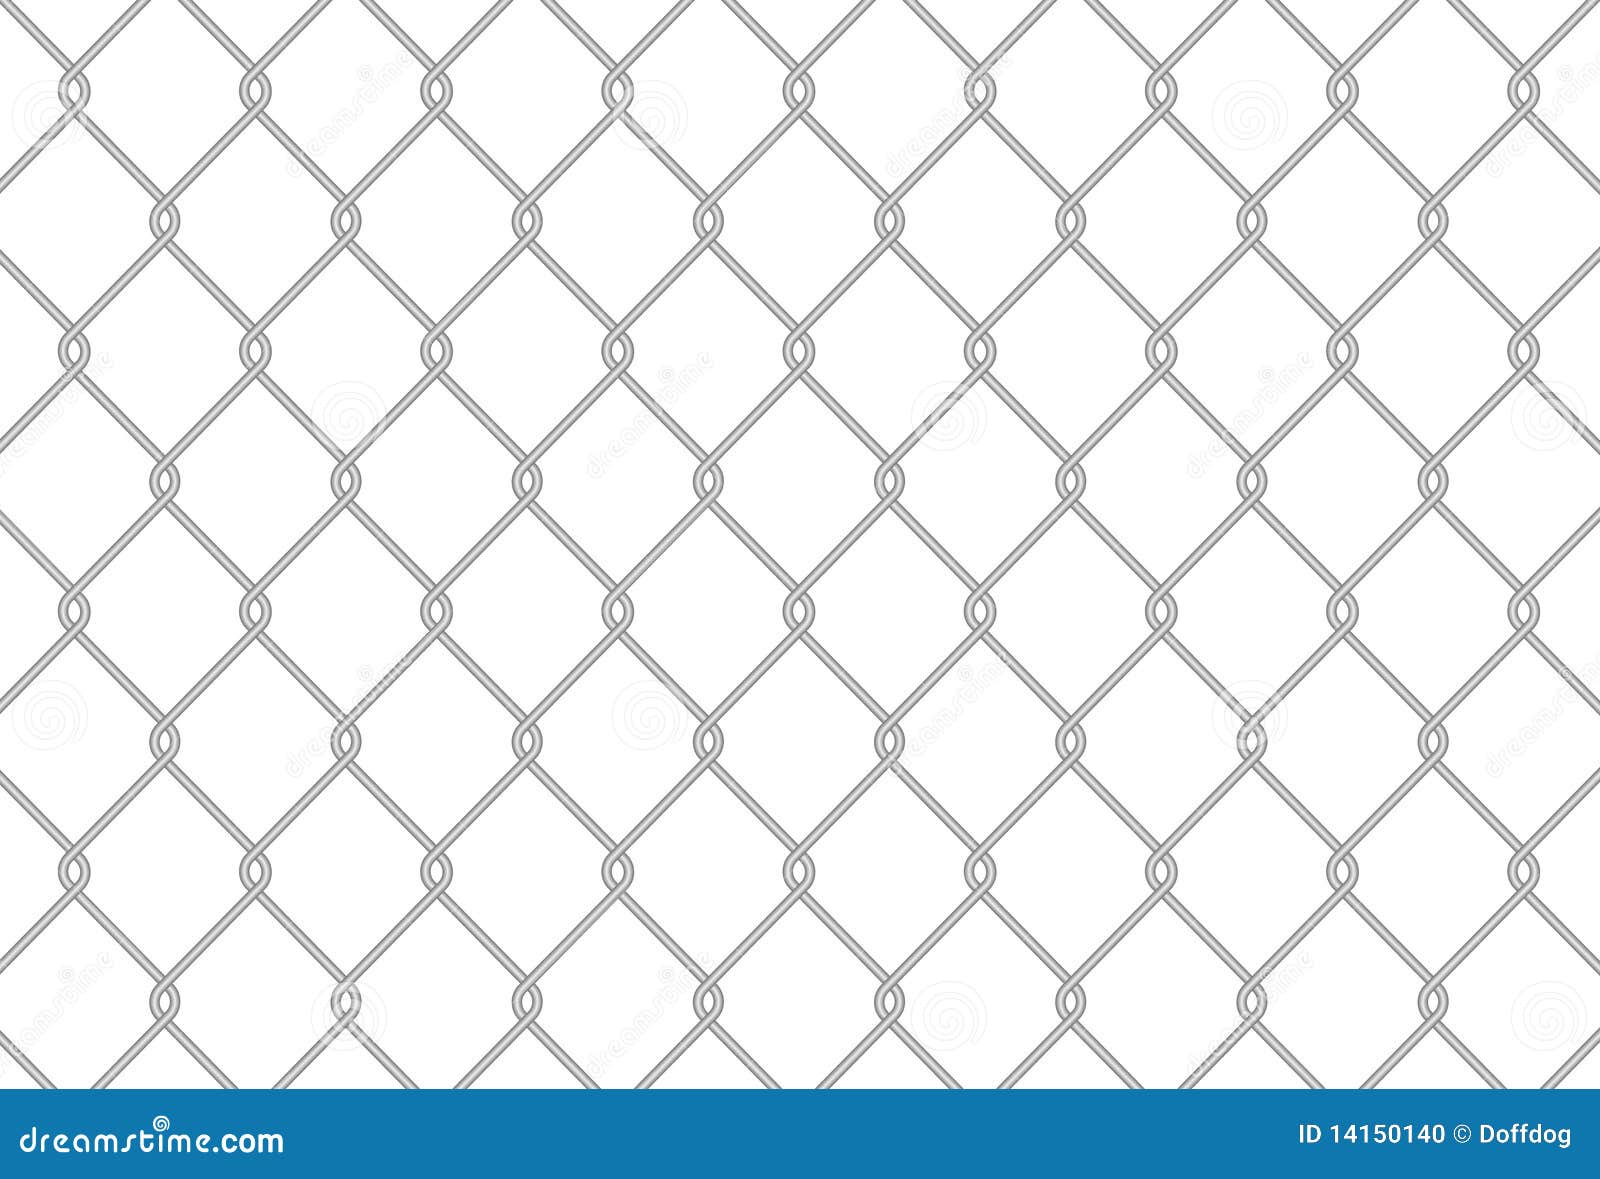 chain link fence texture